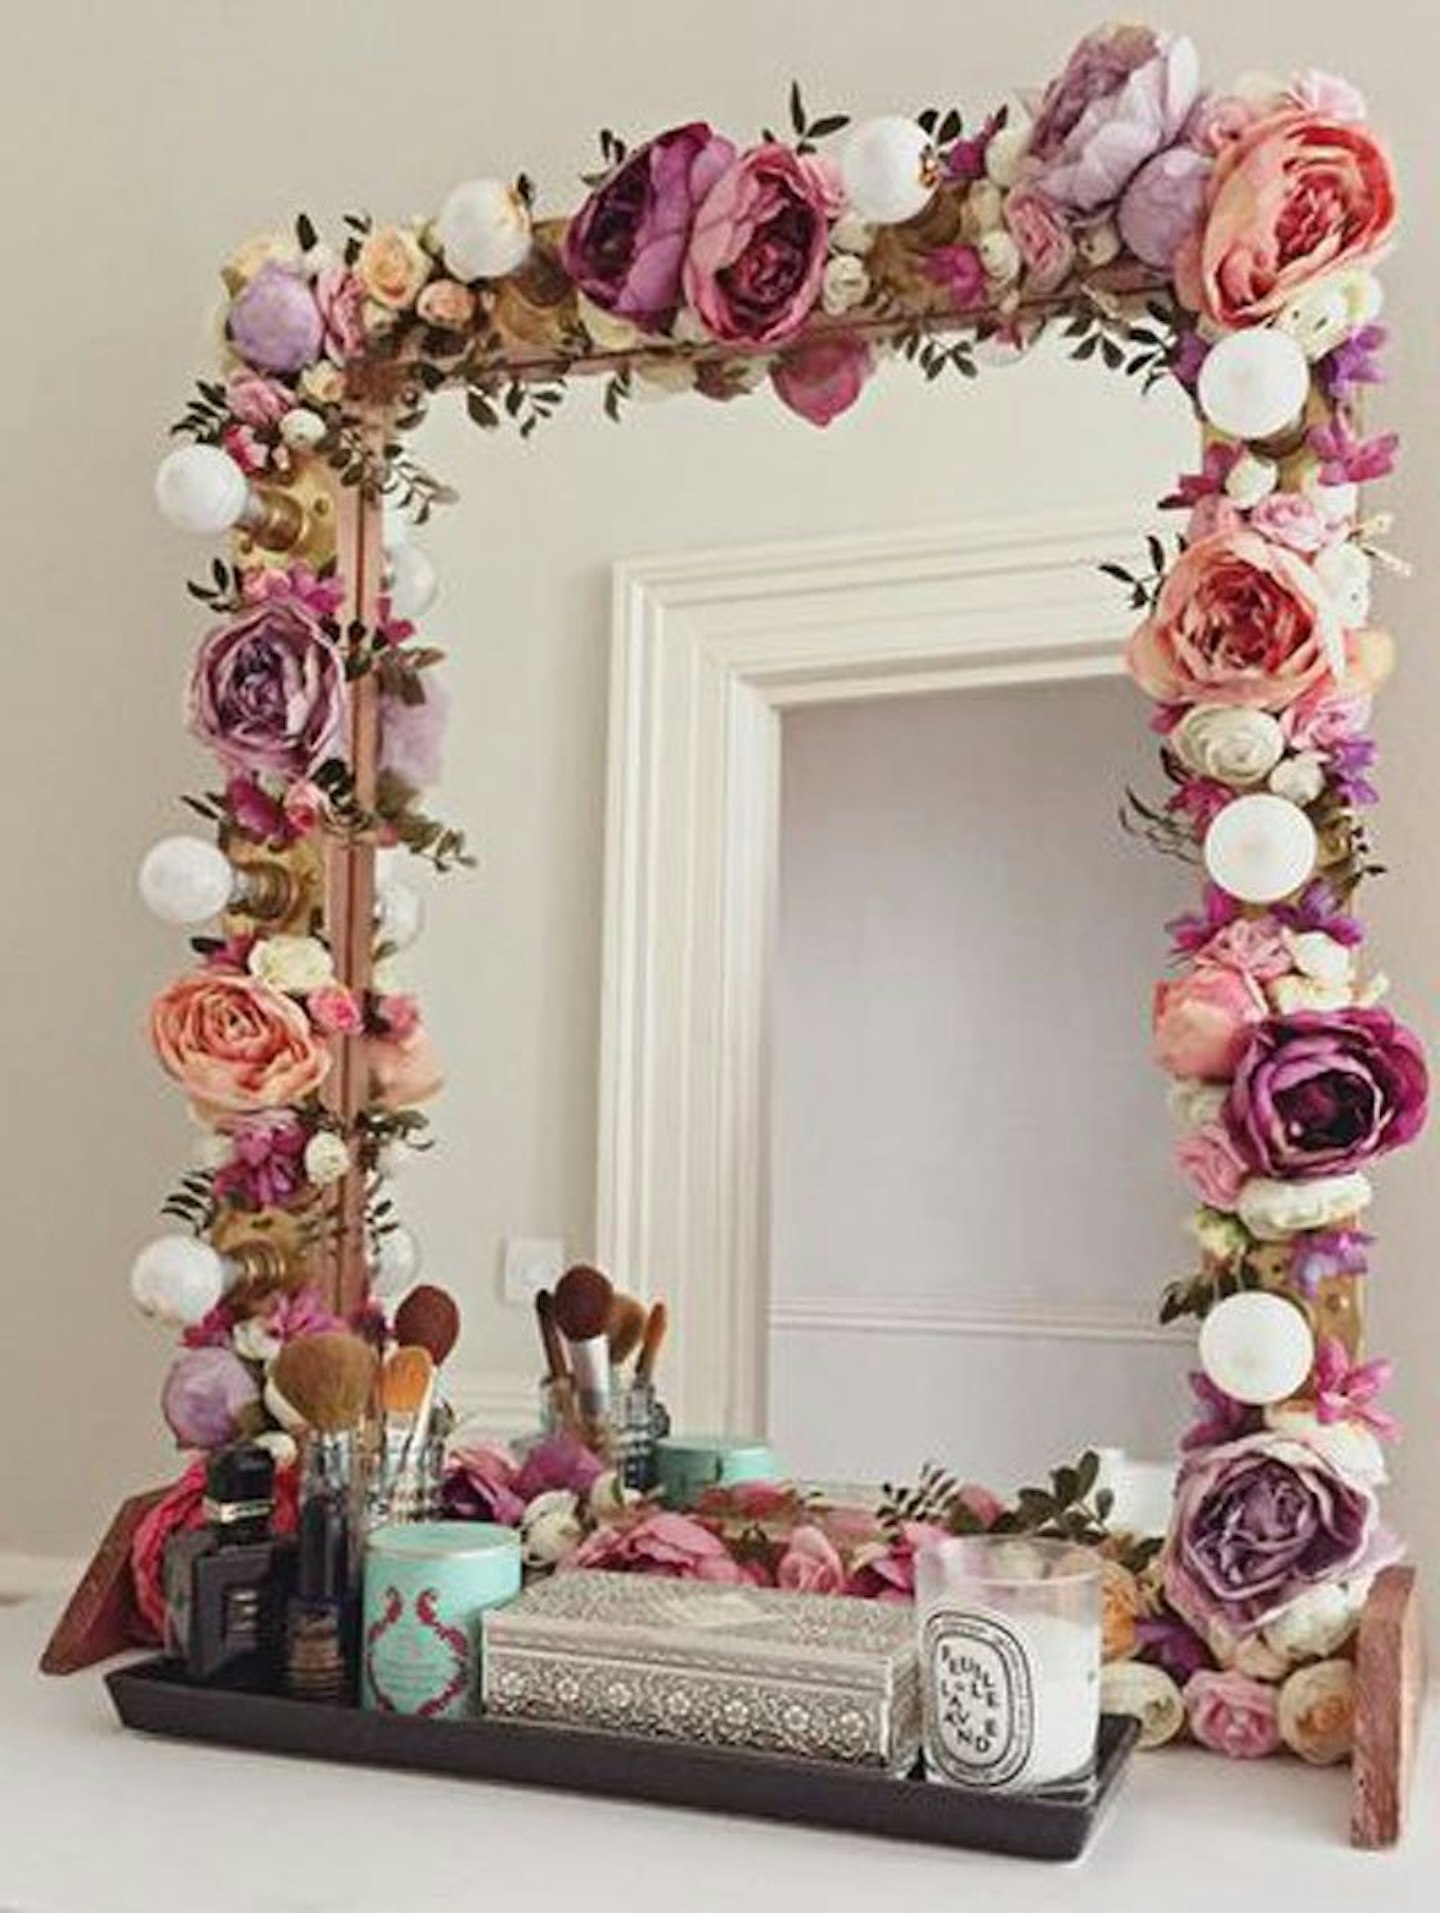 How To Set Up The Vanity Table Of Your Dreams Thanks To Pinterest